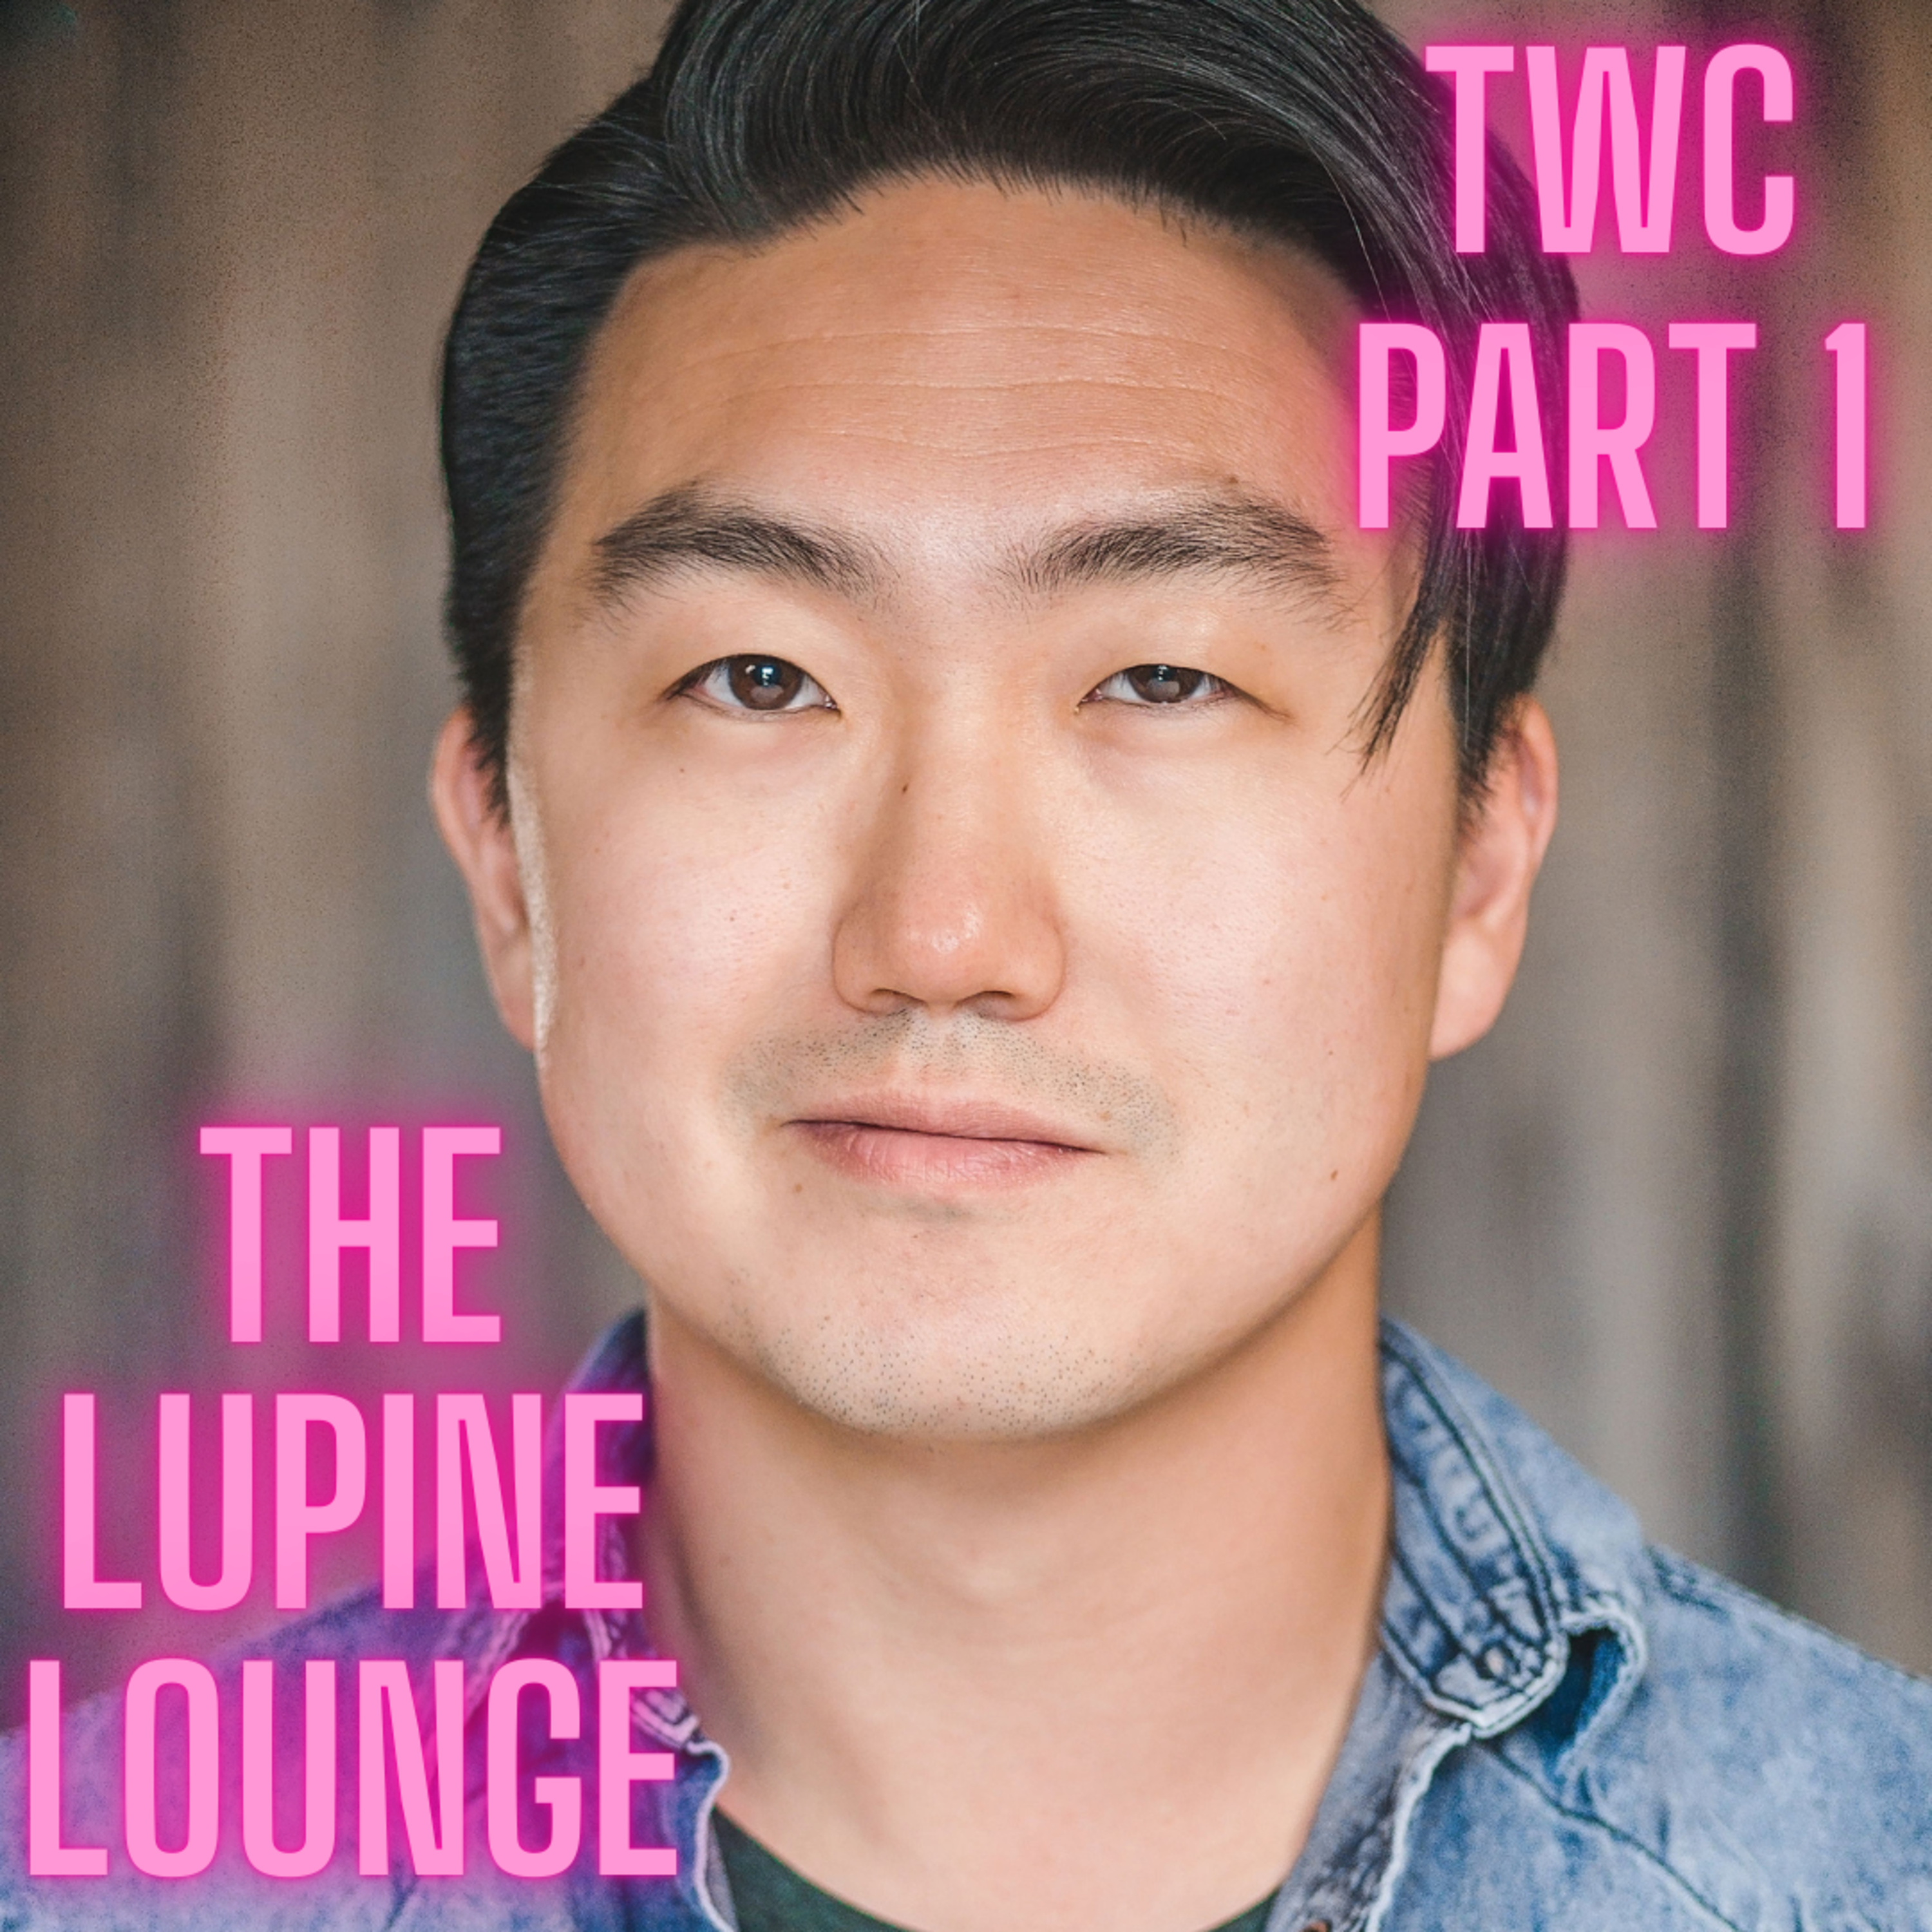 Episode 47: Edward Hong Live in The Lupine Lounge, Part 1